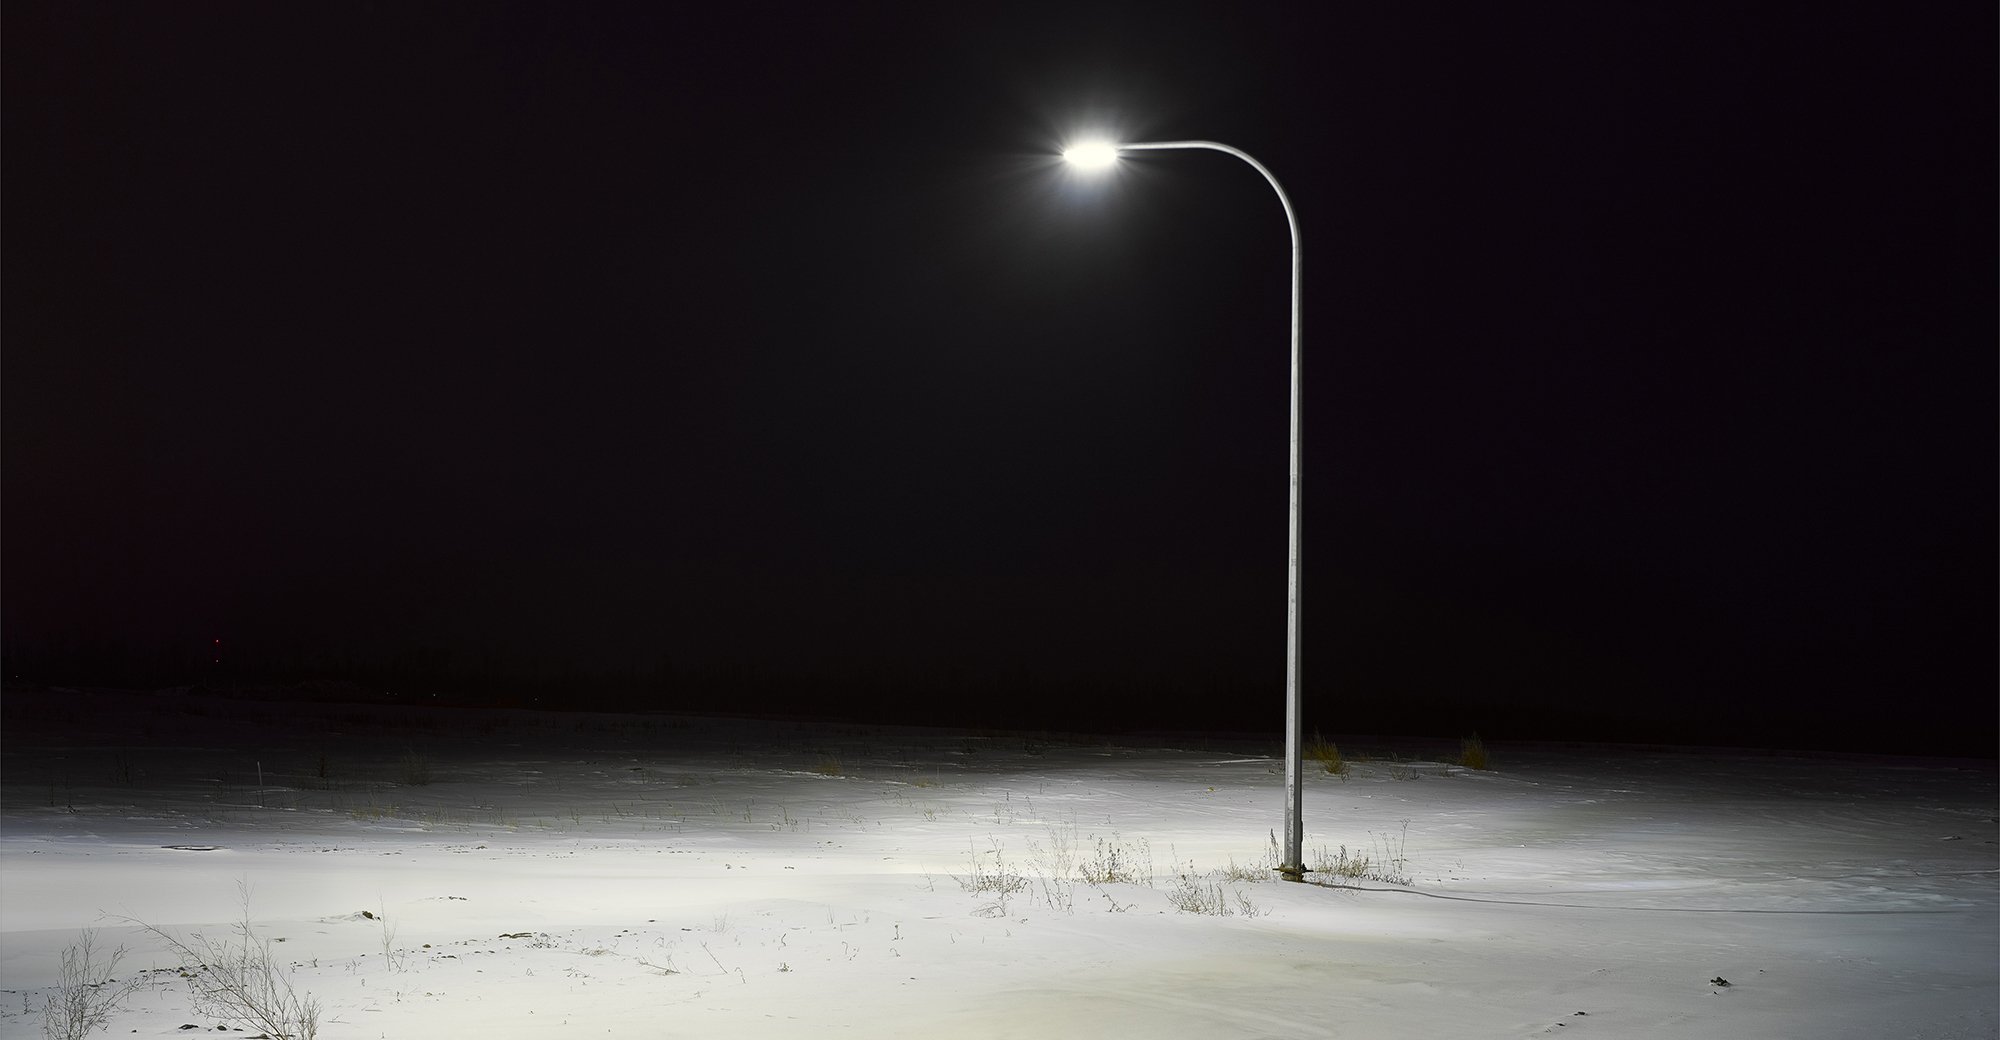 Photograph of a lone street lamp in the dark